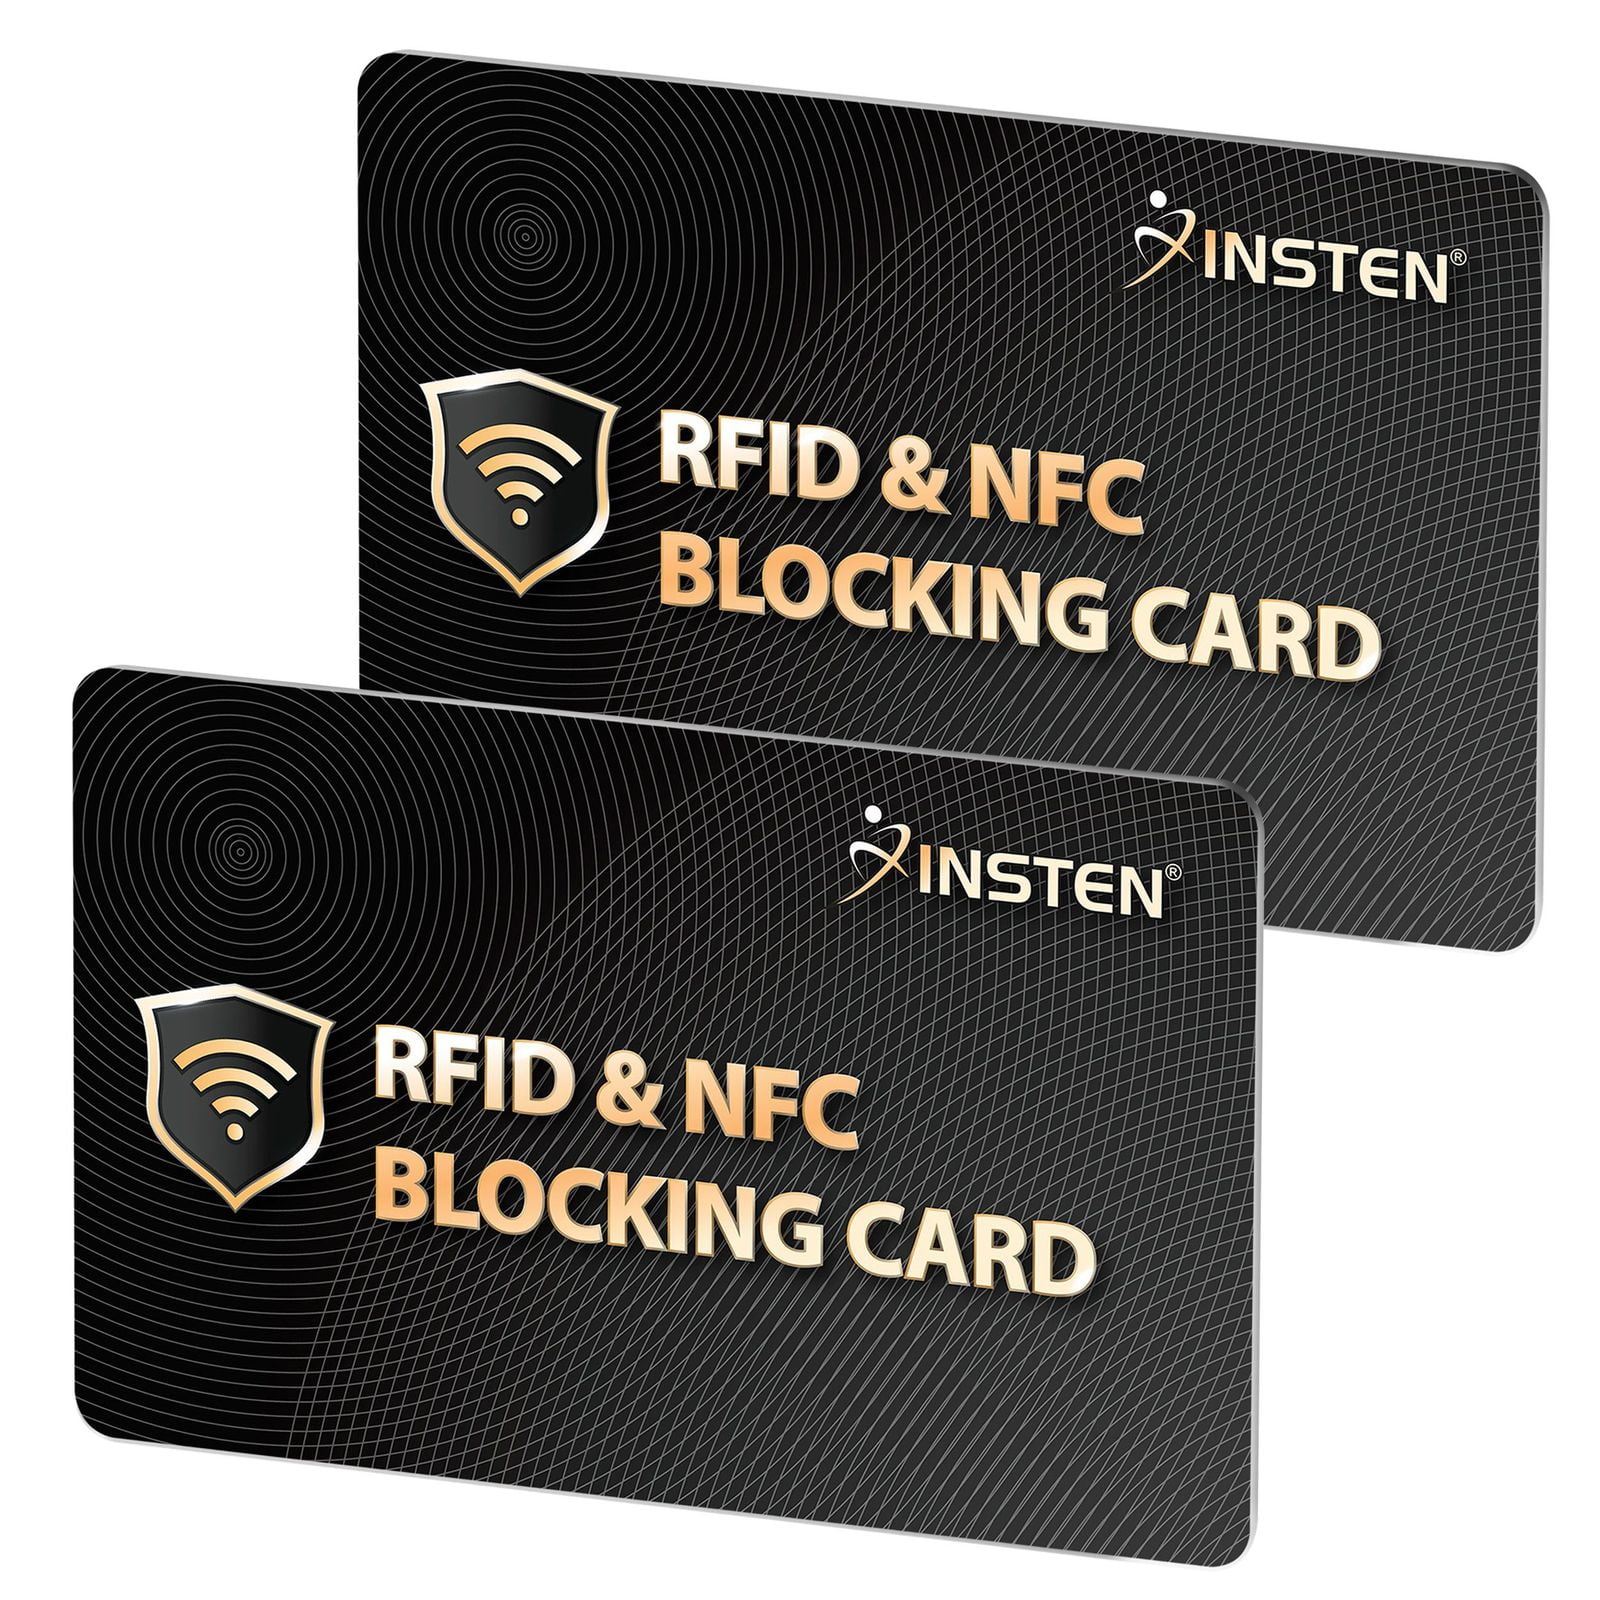 RFID/NFC Blocking Card by Credit Card Protector, 2 Pack